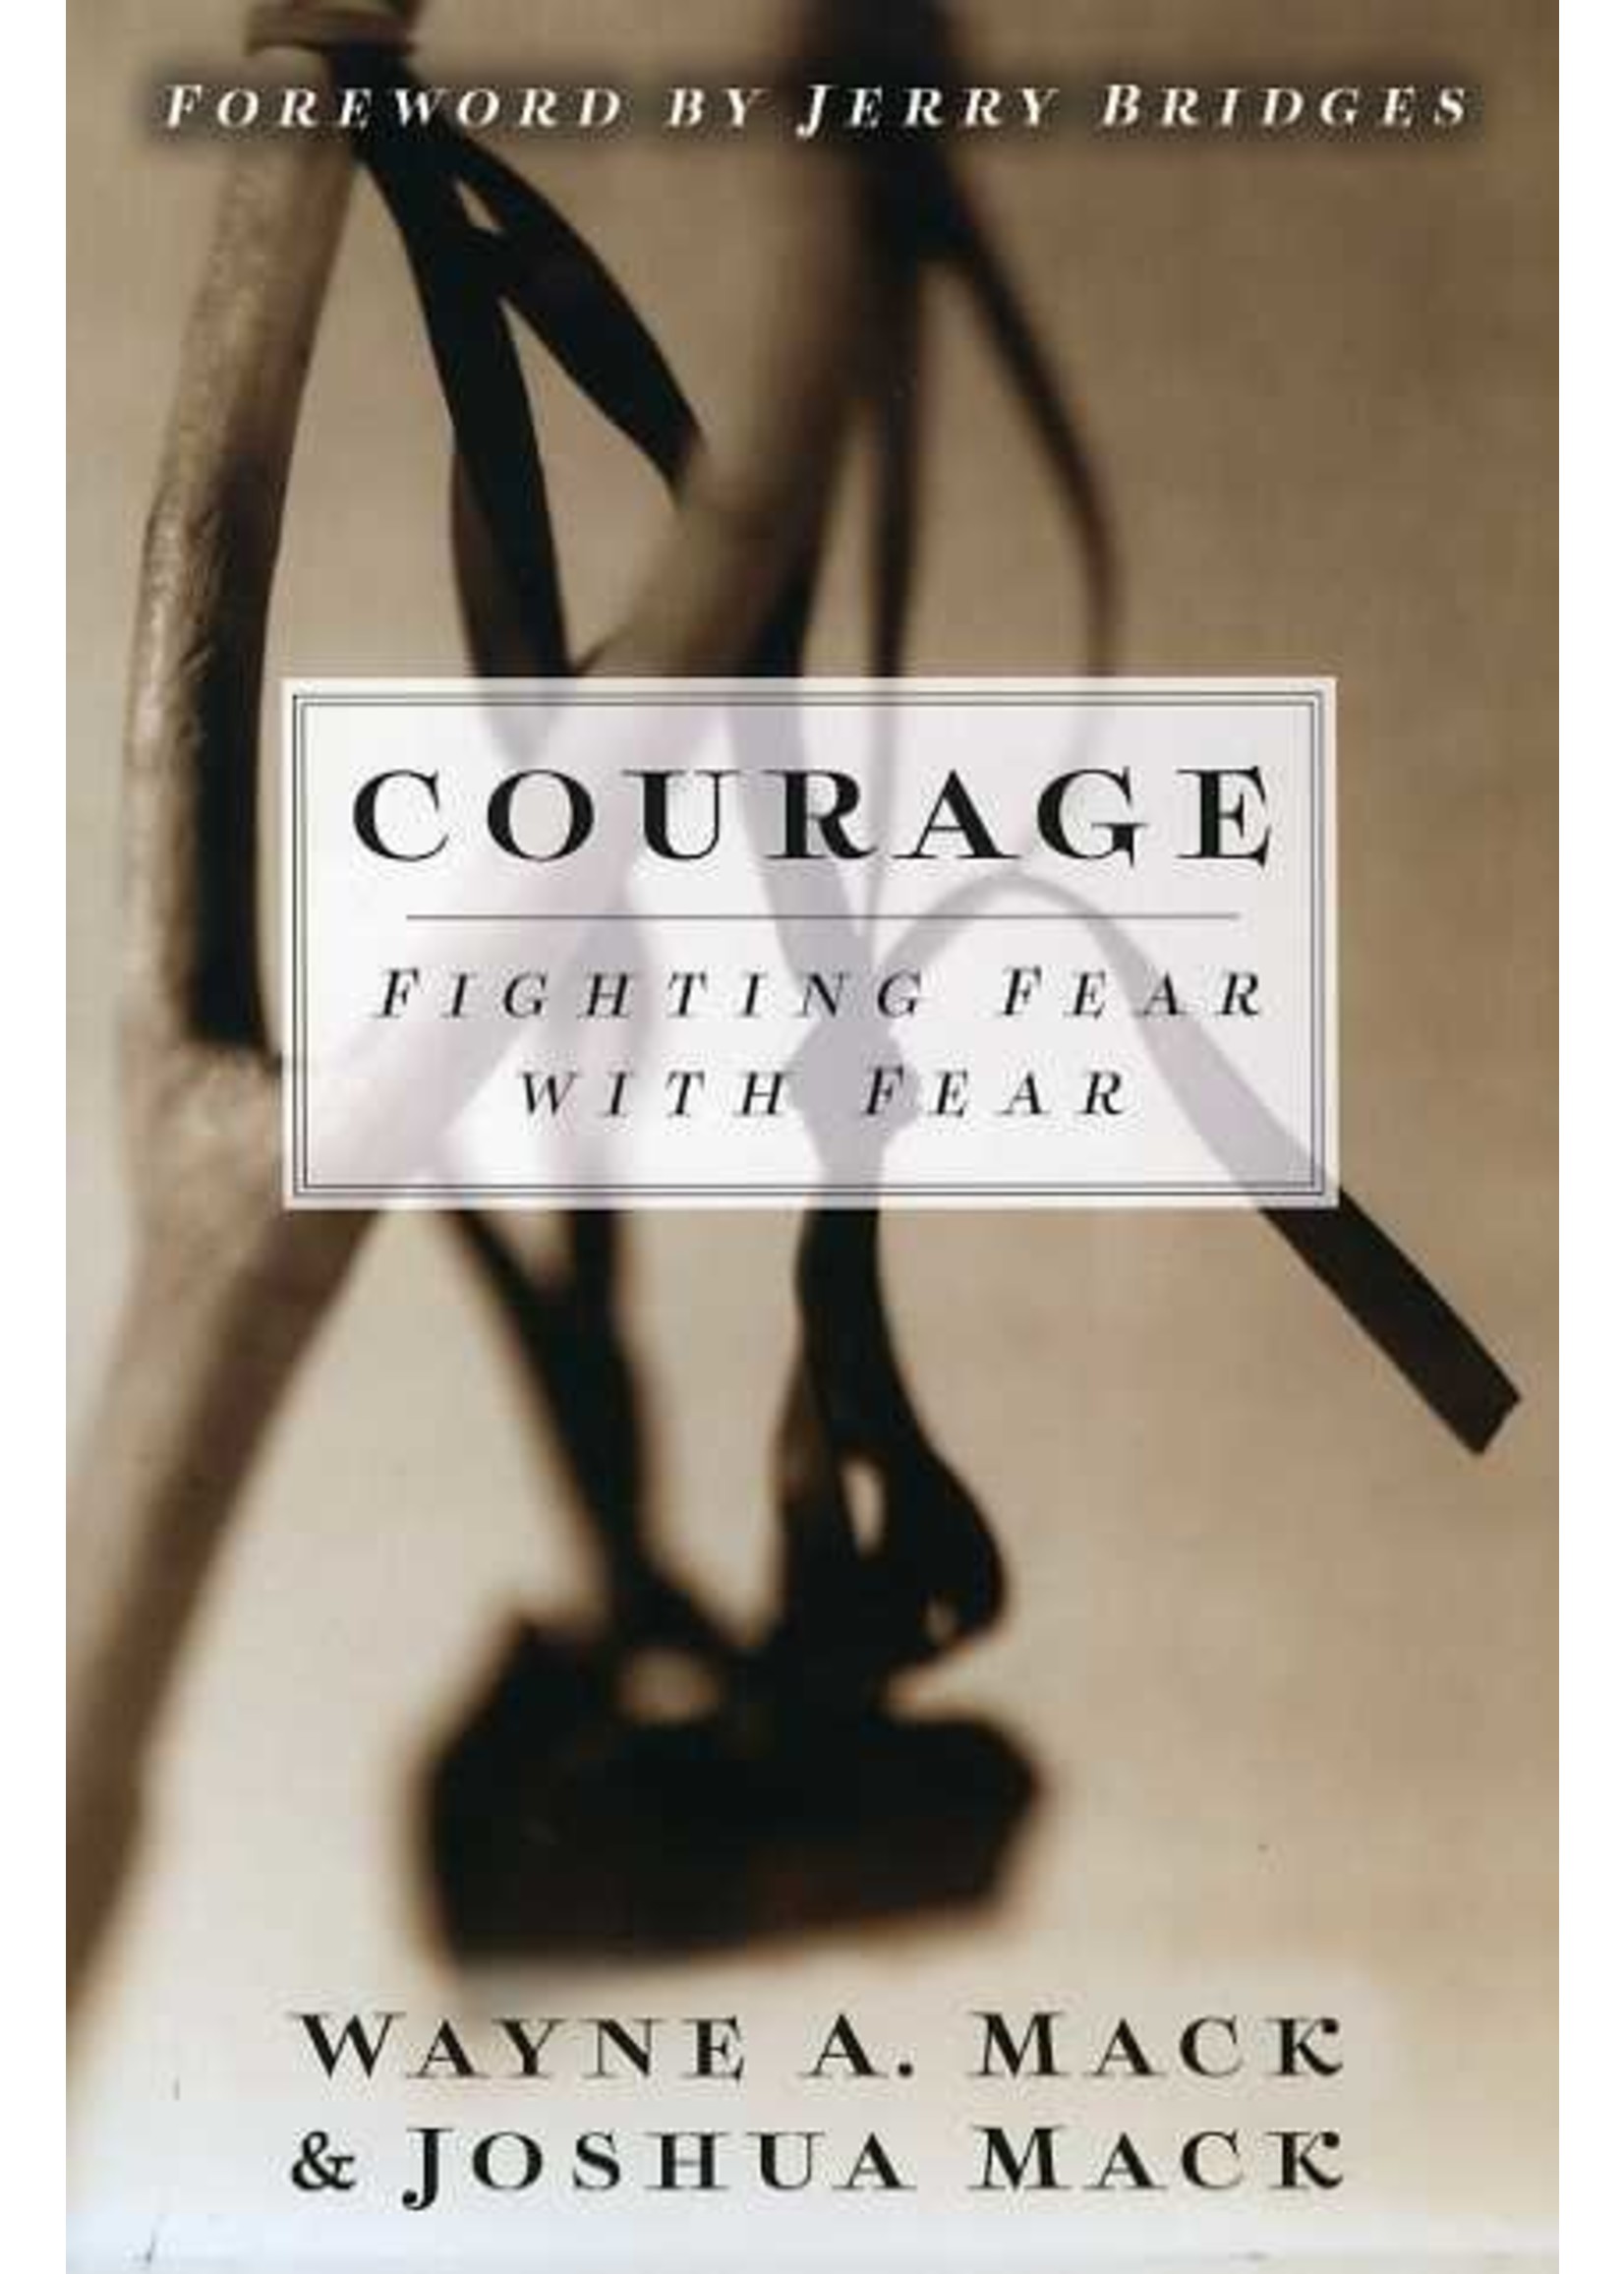 Courage: Fighting Fear with Fear - Wayne Mack